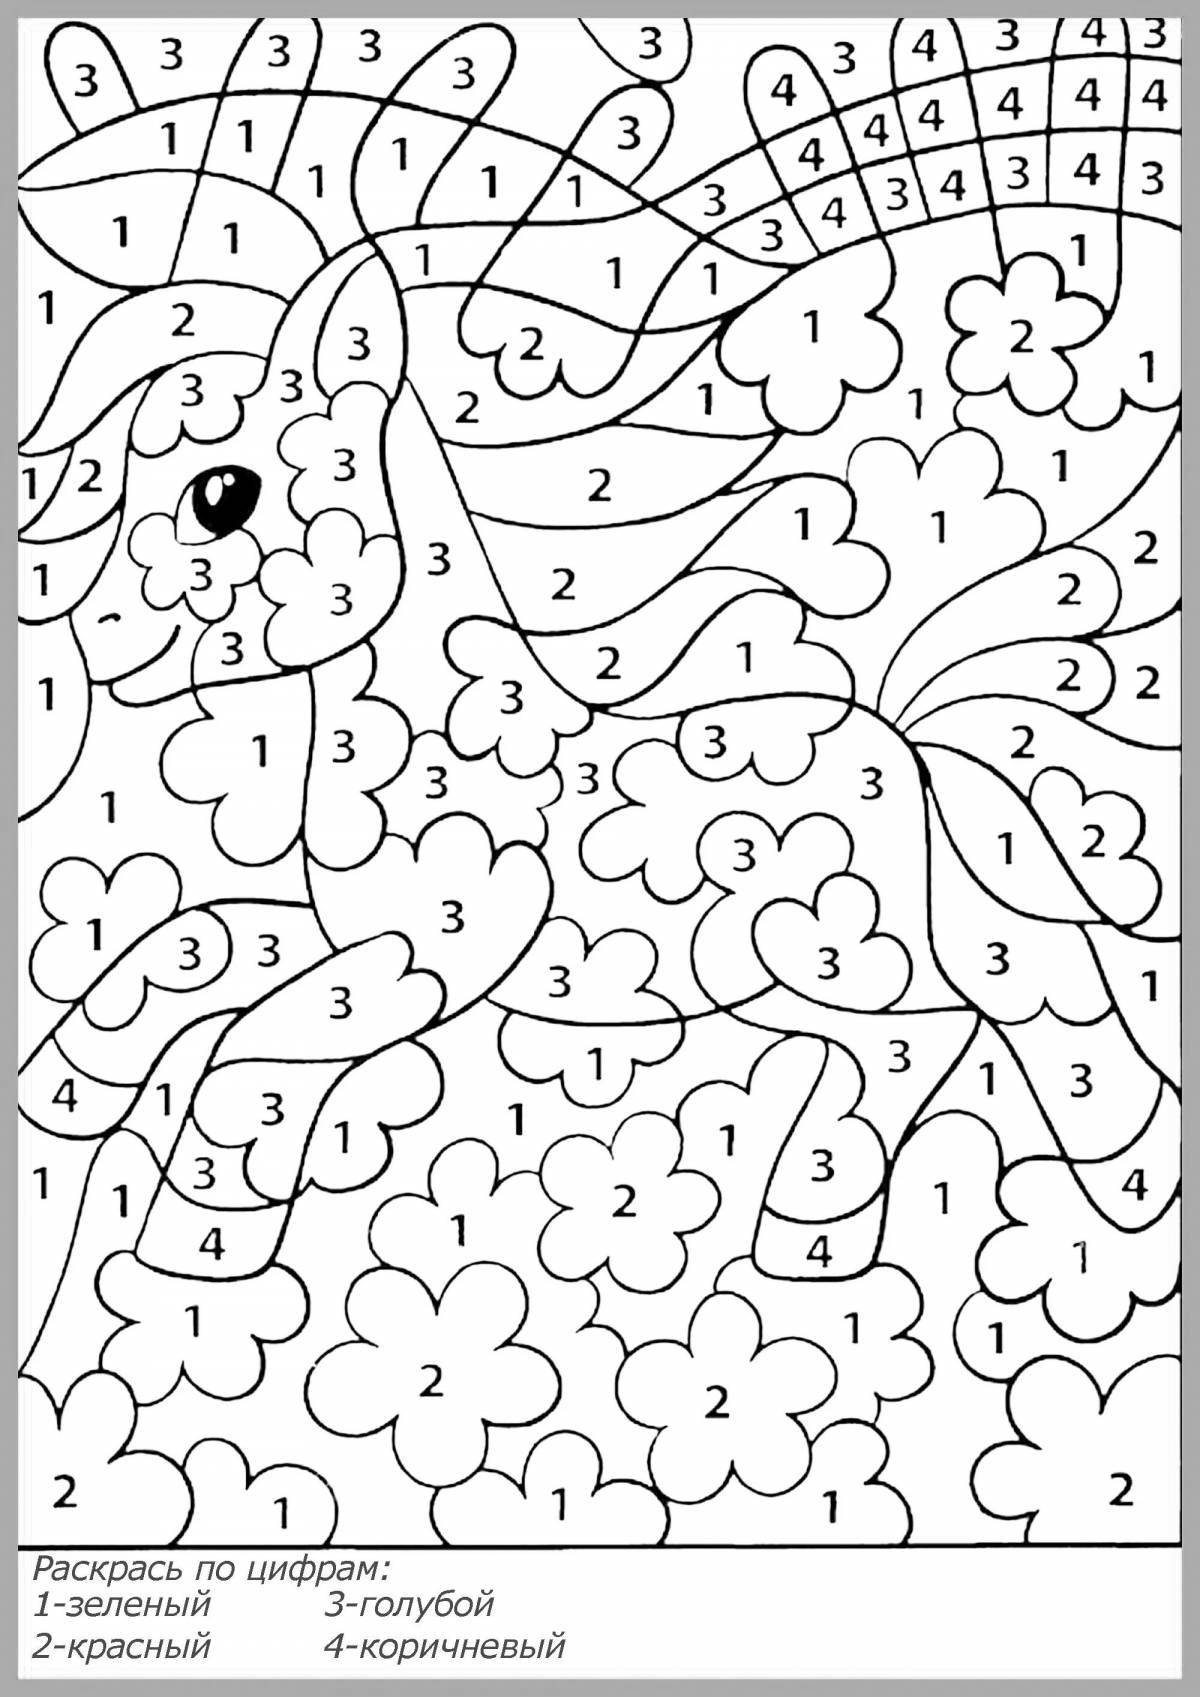 Interactive coloring book for 8 year olds